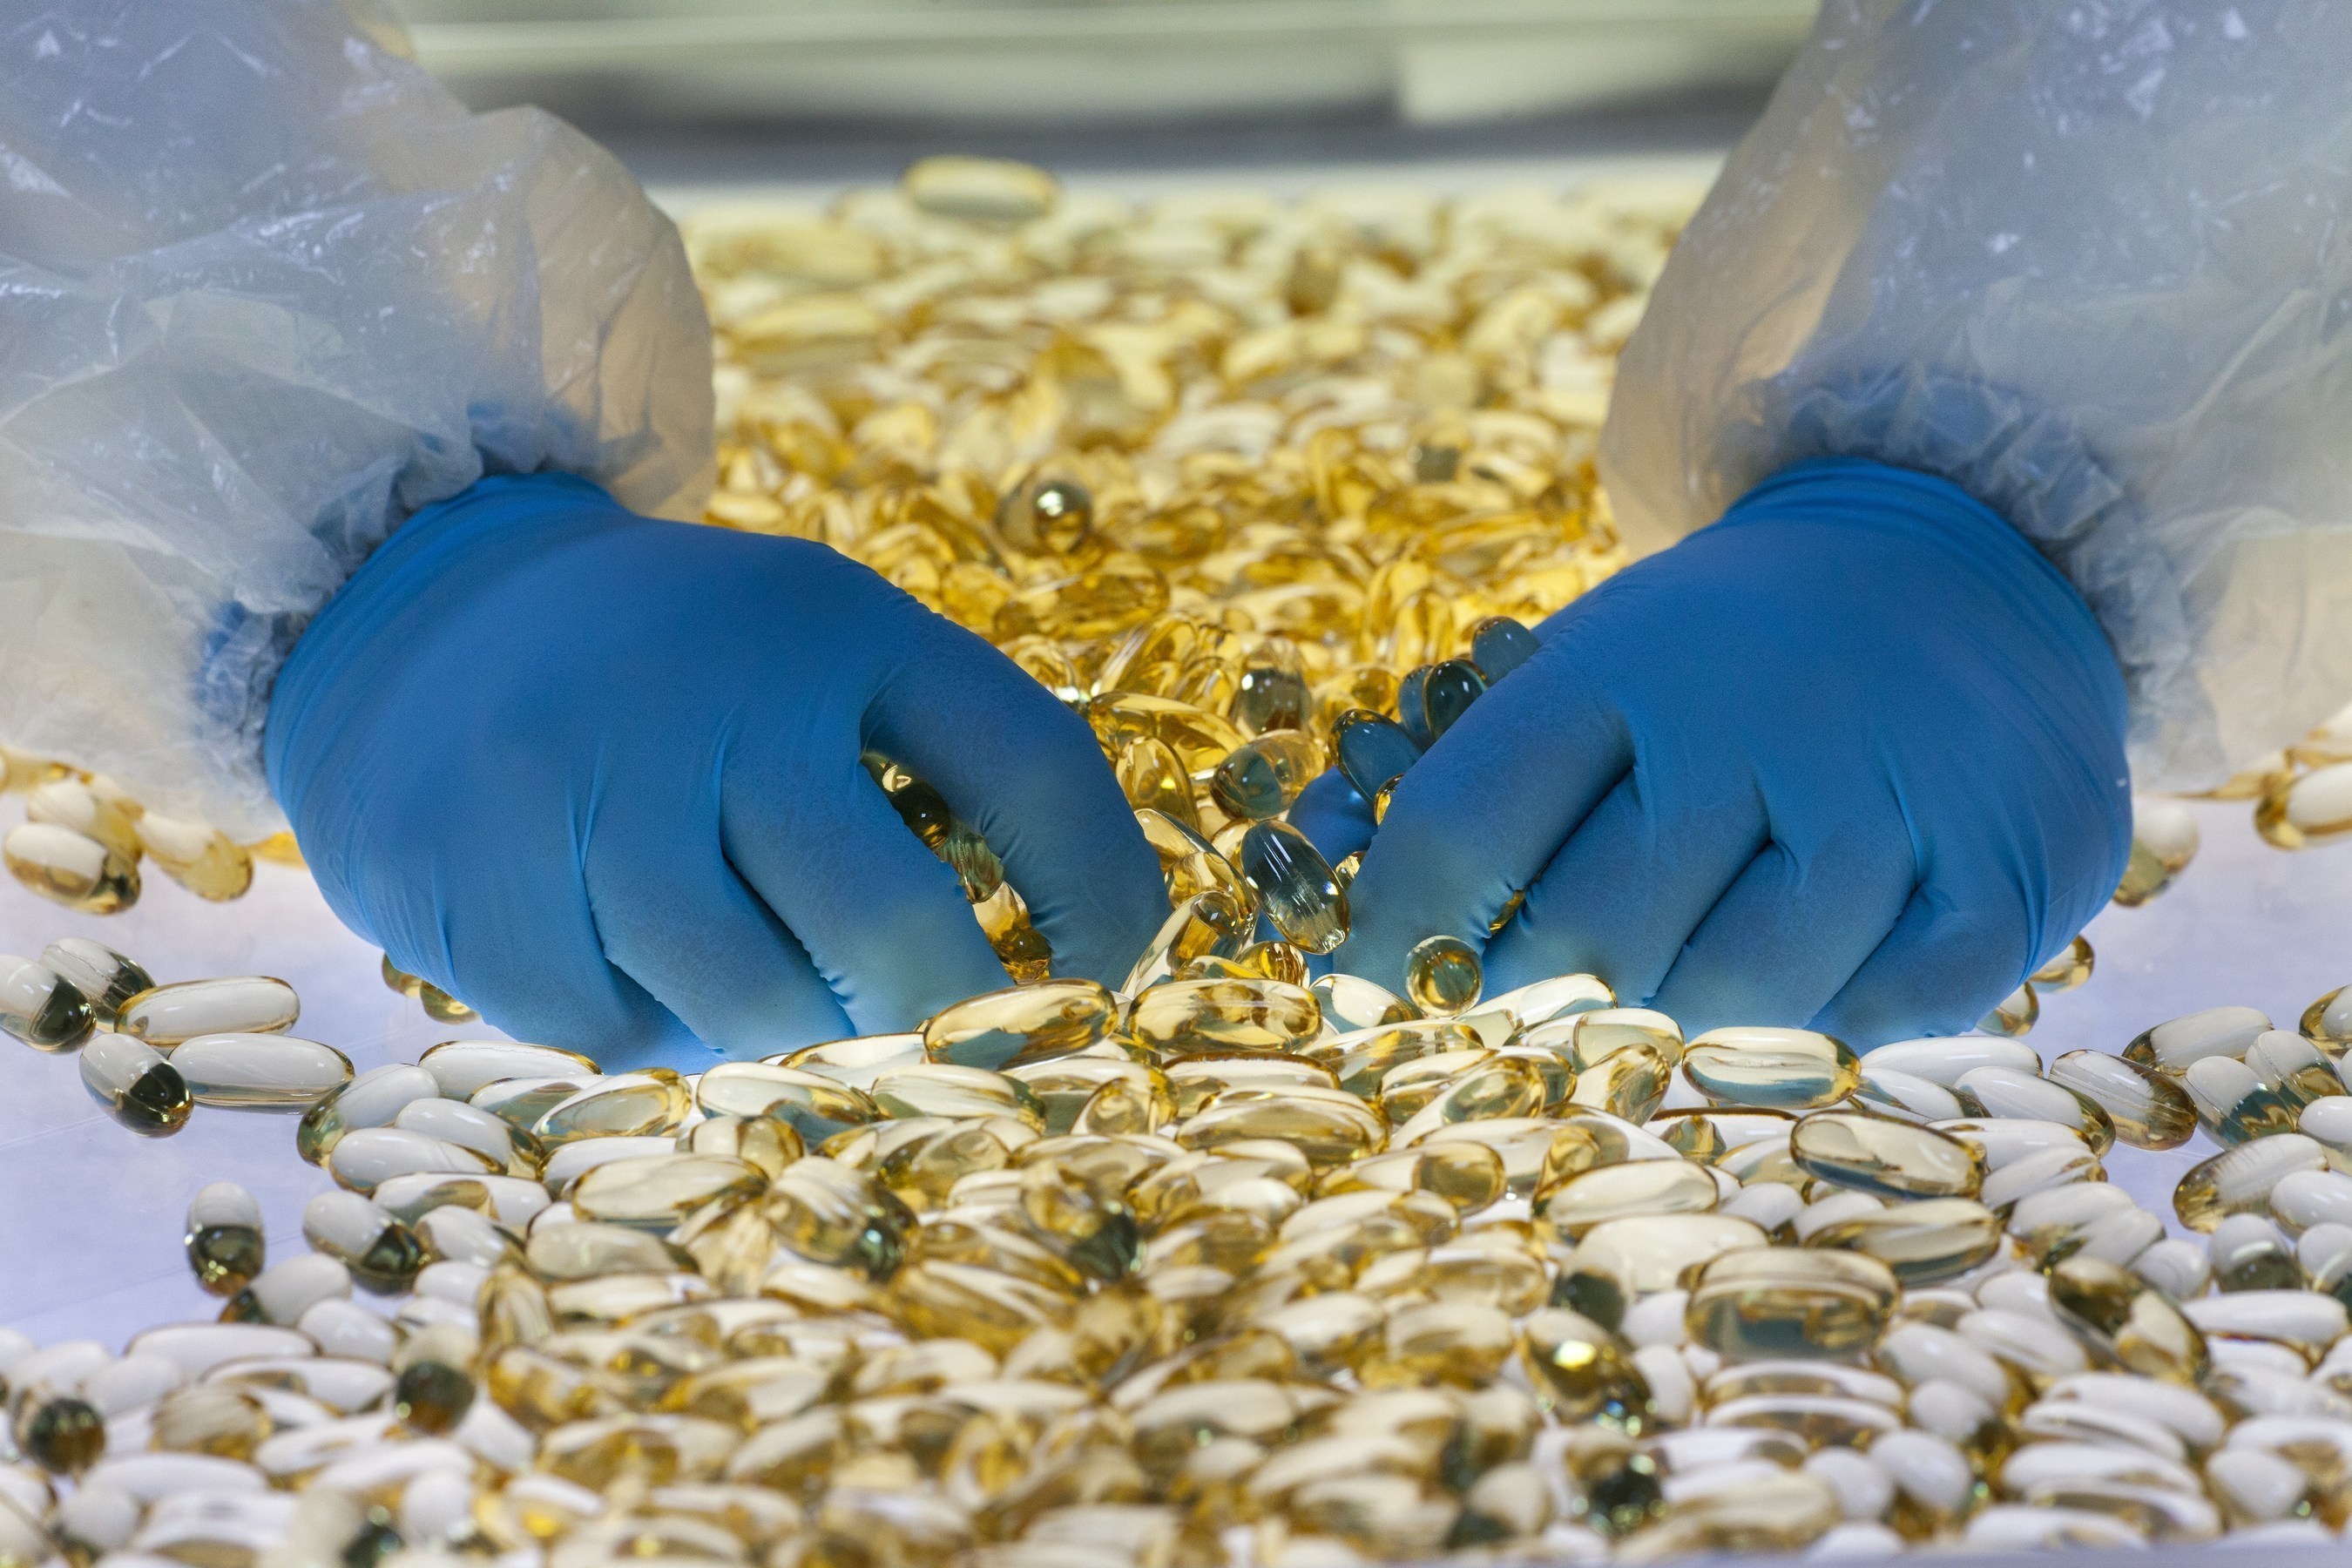 Capsugel's facilities in Edinburgh and Ploërmel design, develop and manufacture lipid-based formulations -- a key component of Capsugel's bioavailability enhancement offering -- for the global pharmaceutical market.